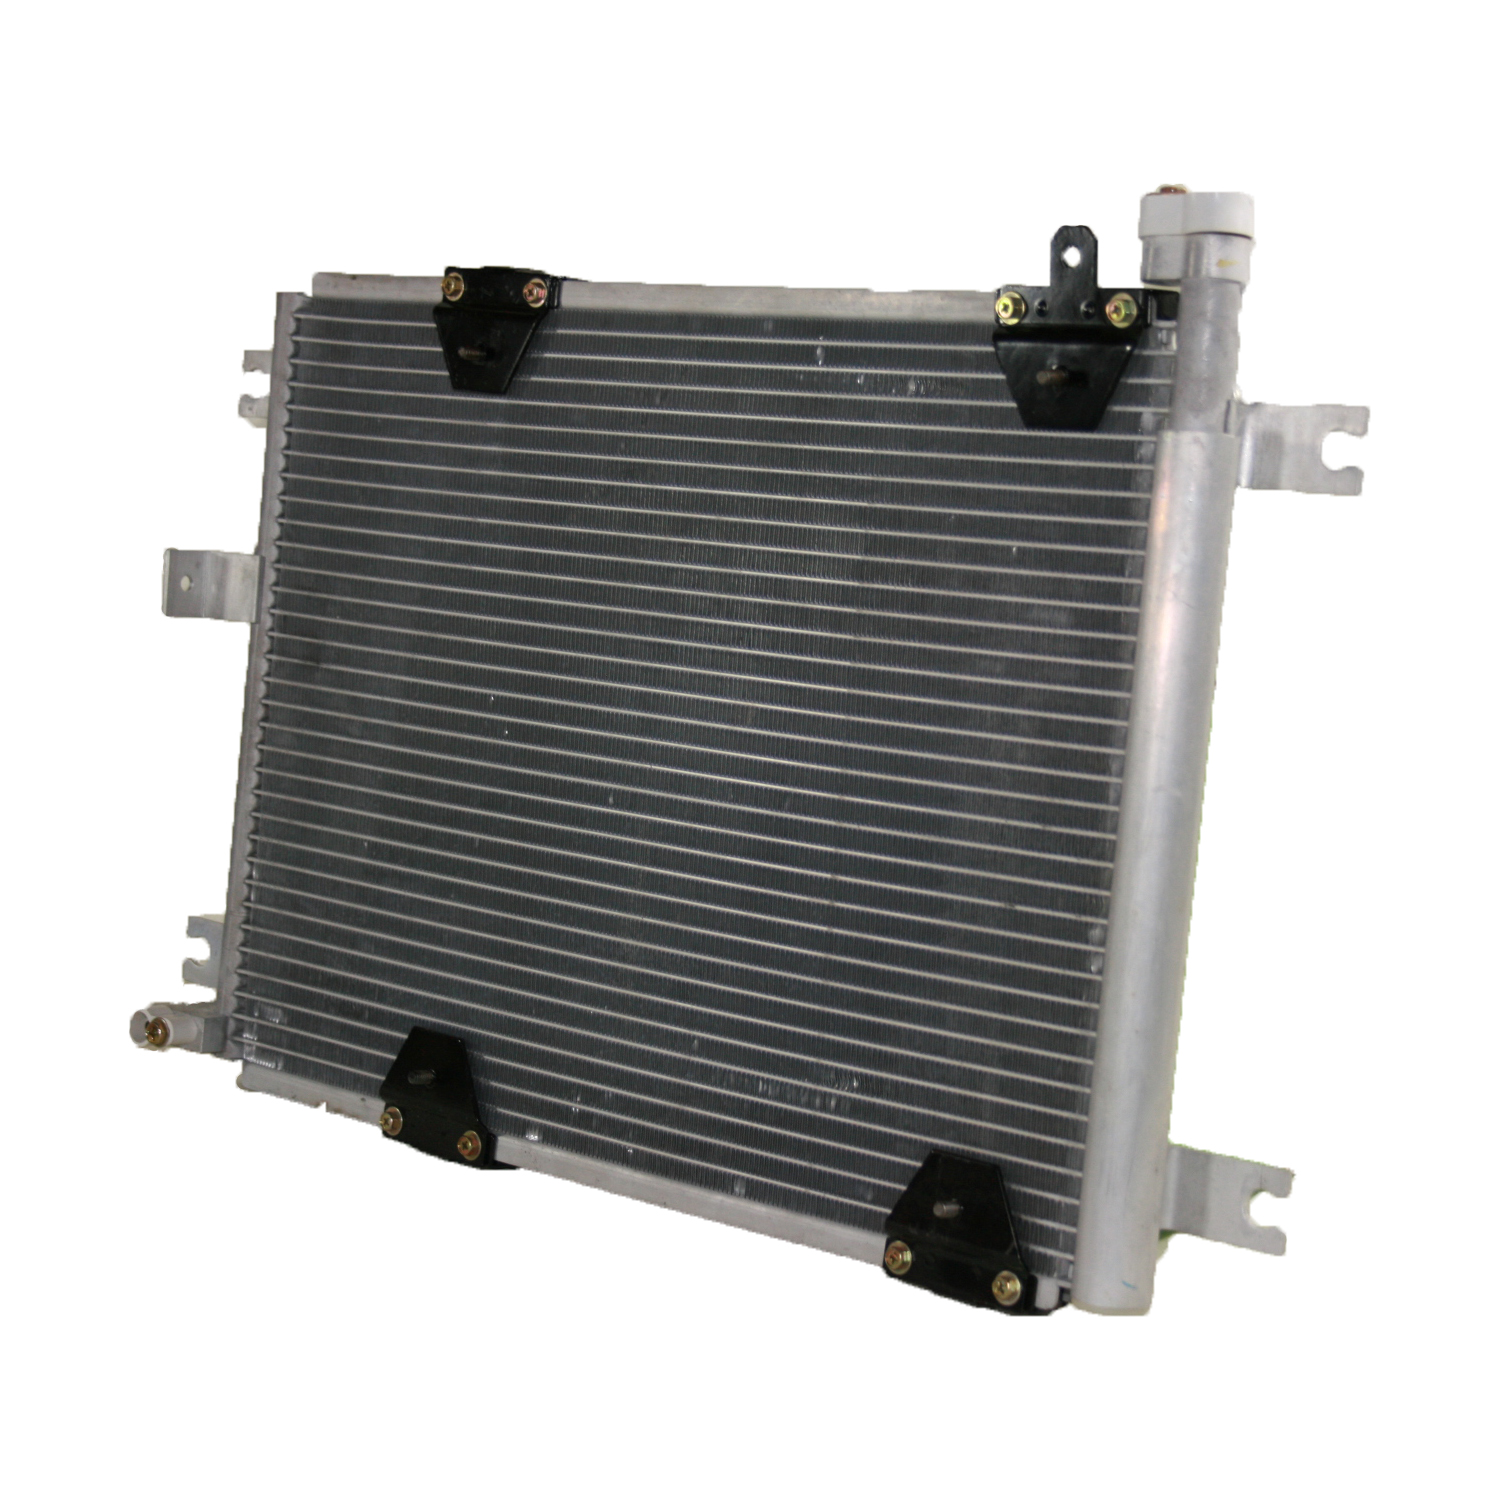 TCW Condenser 44-3033 New Product Image field_60b6a13a6e67c